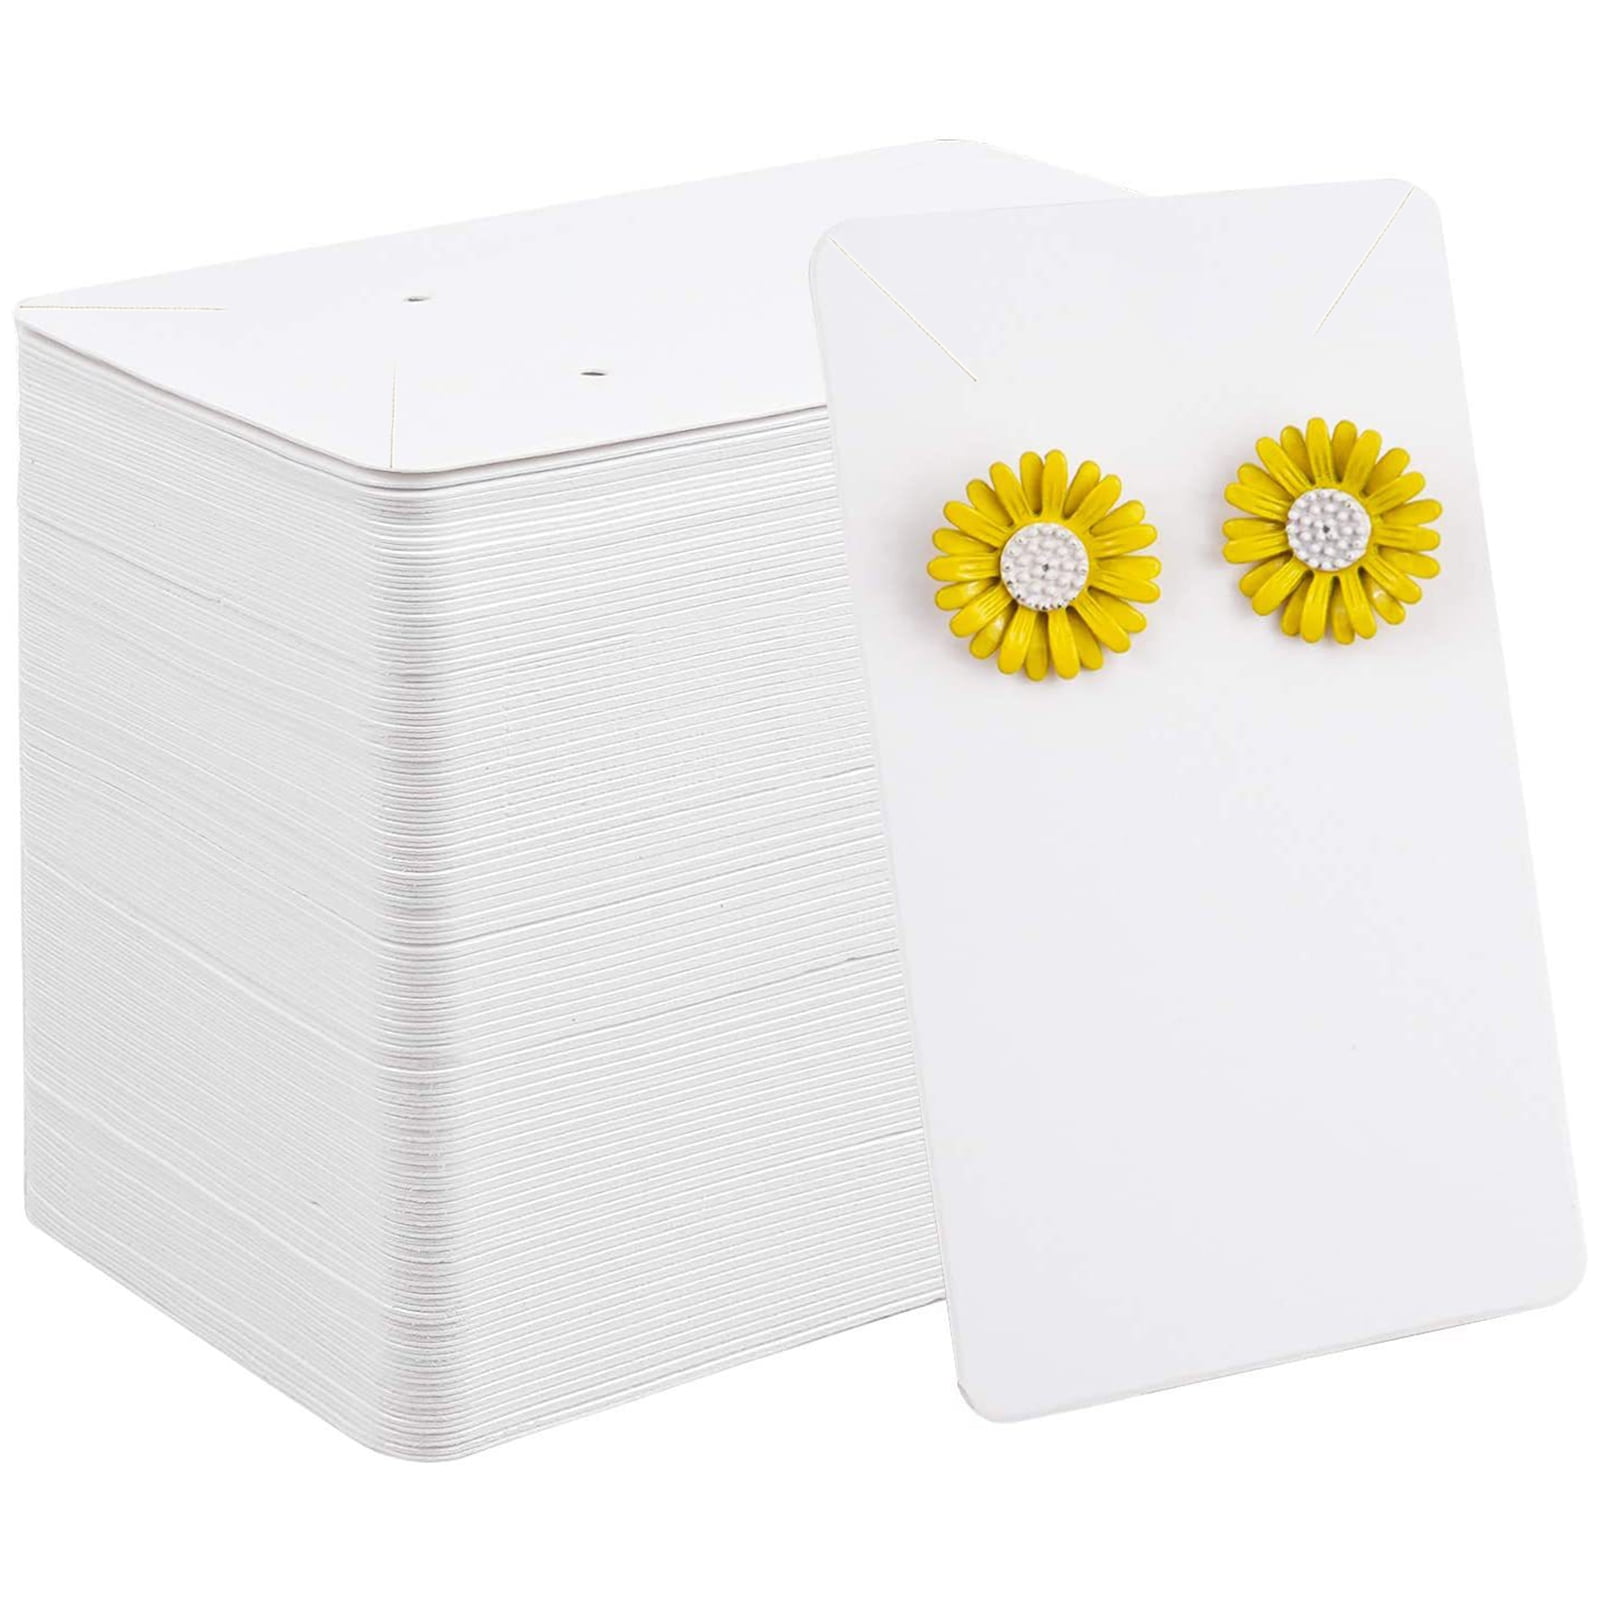 100 Pcs Earring Display Cards Necklace Jewelry Packing Paper Card Tag  HoldeF:yx